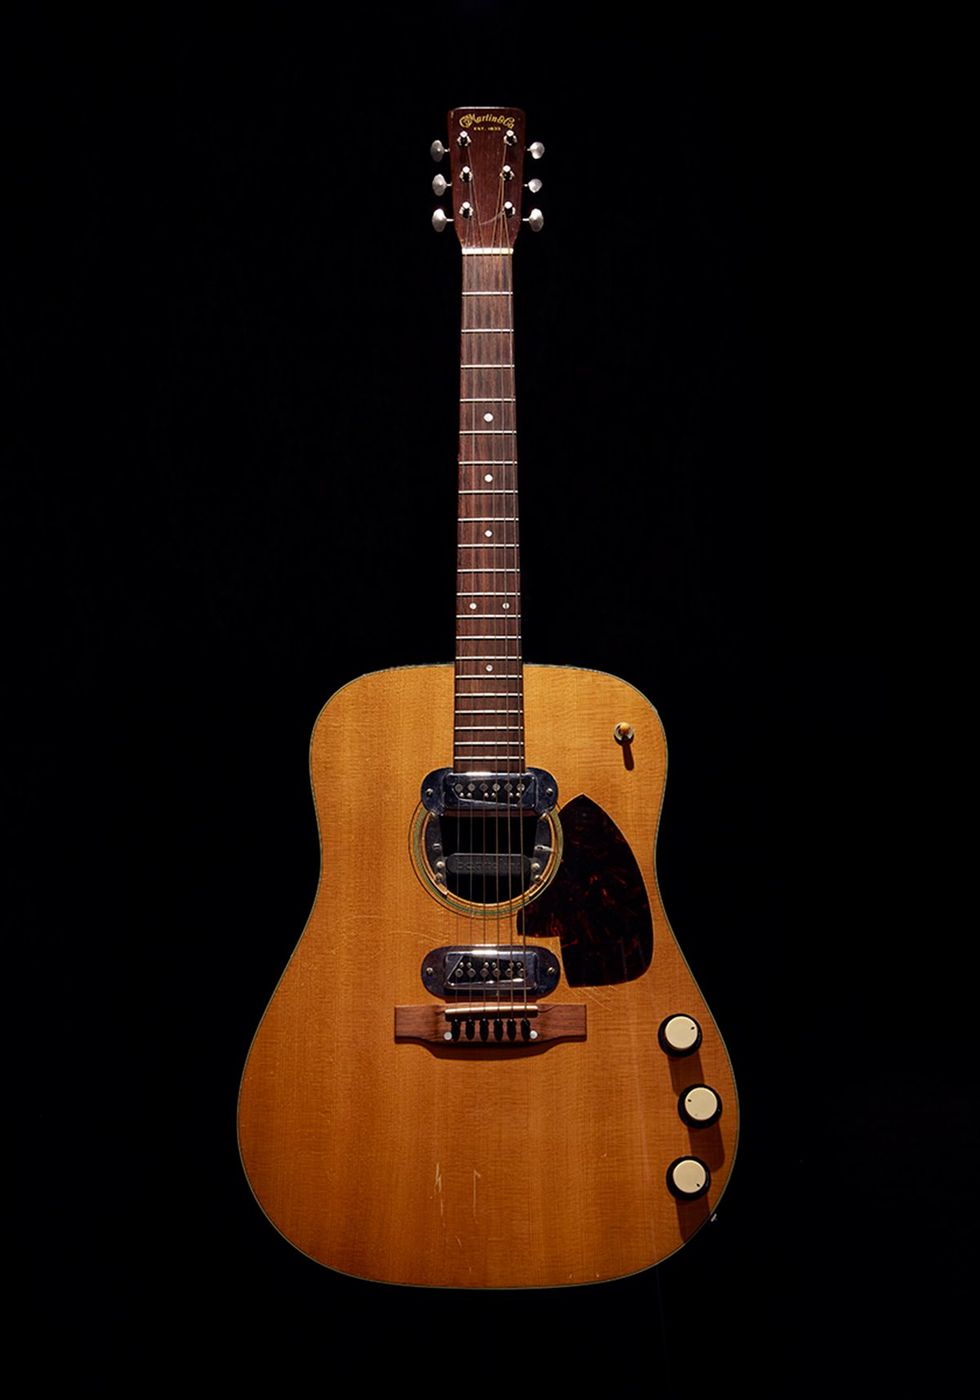 1959 Martin D-18E was played by Cobain during Nirvana's MTVUnplugged in NewYork, 1993